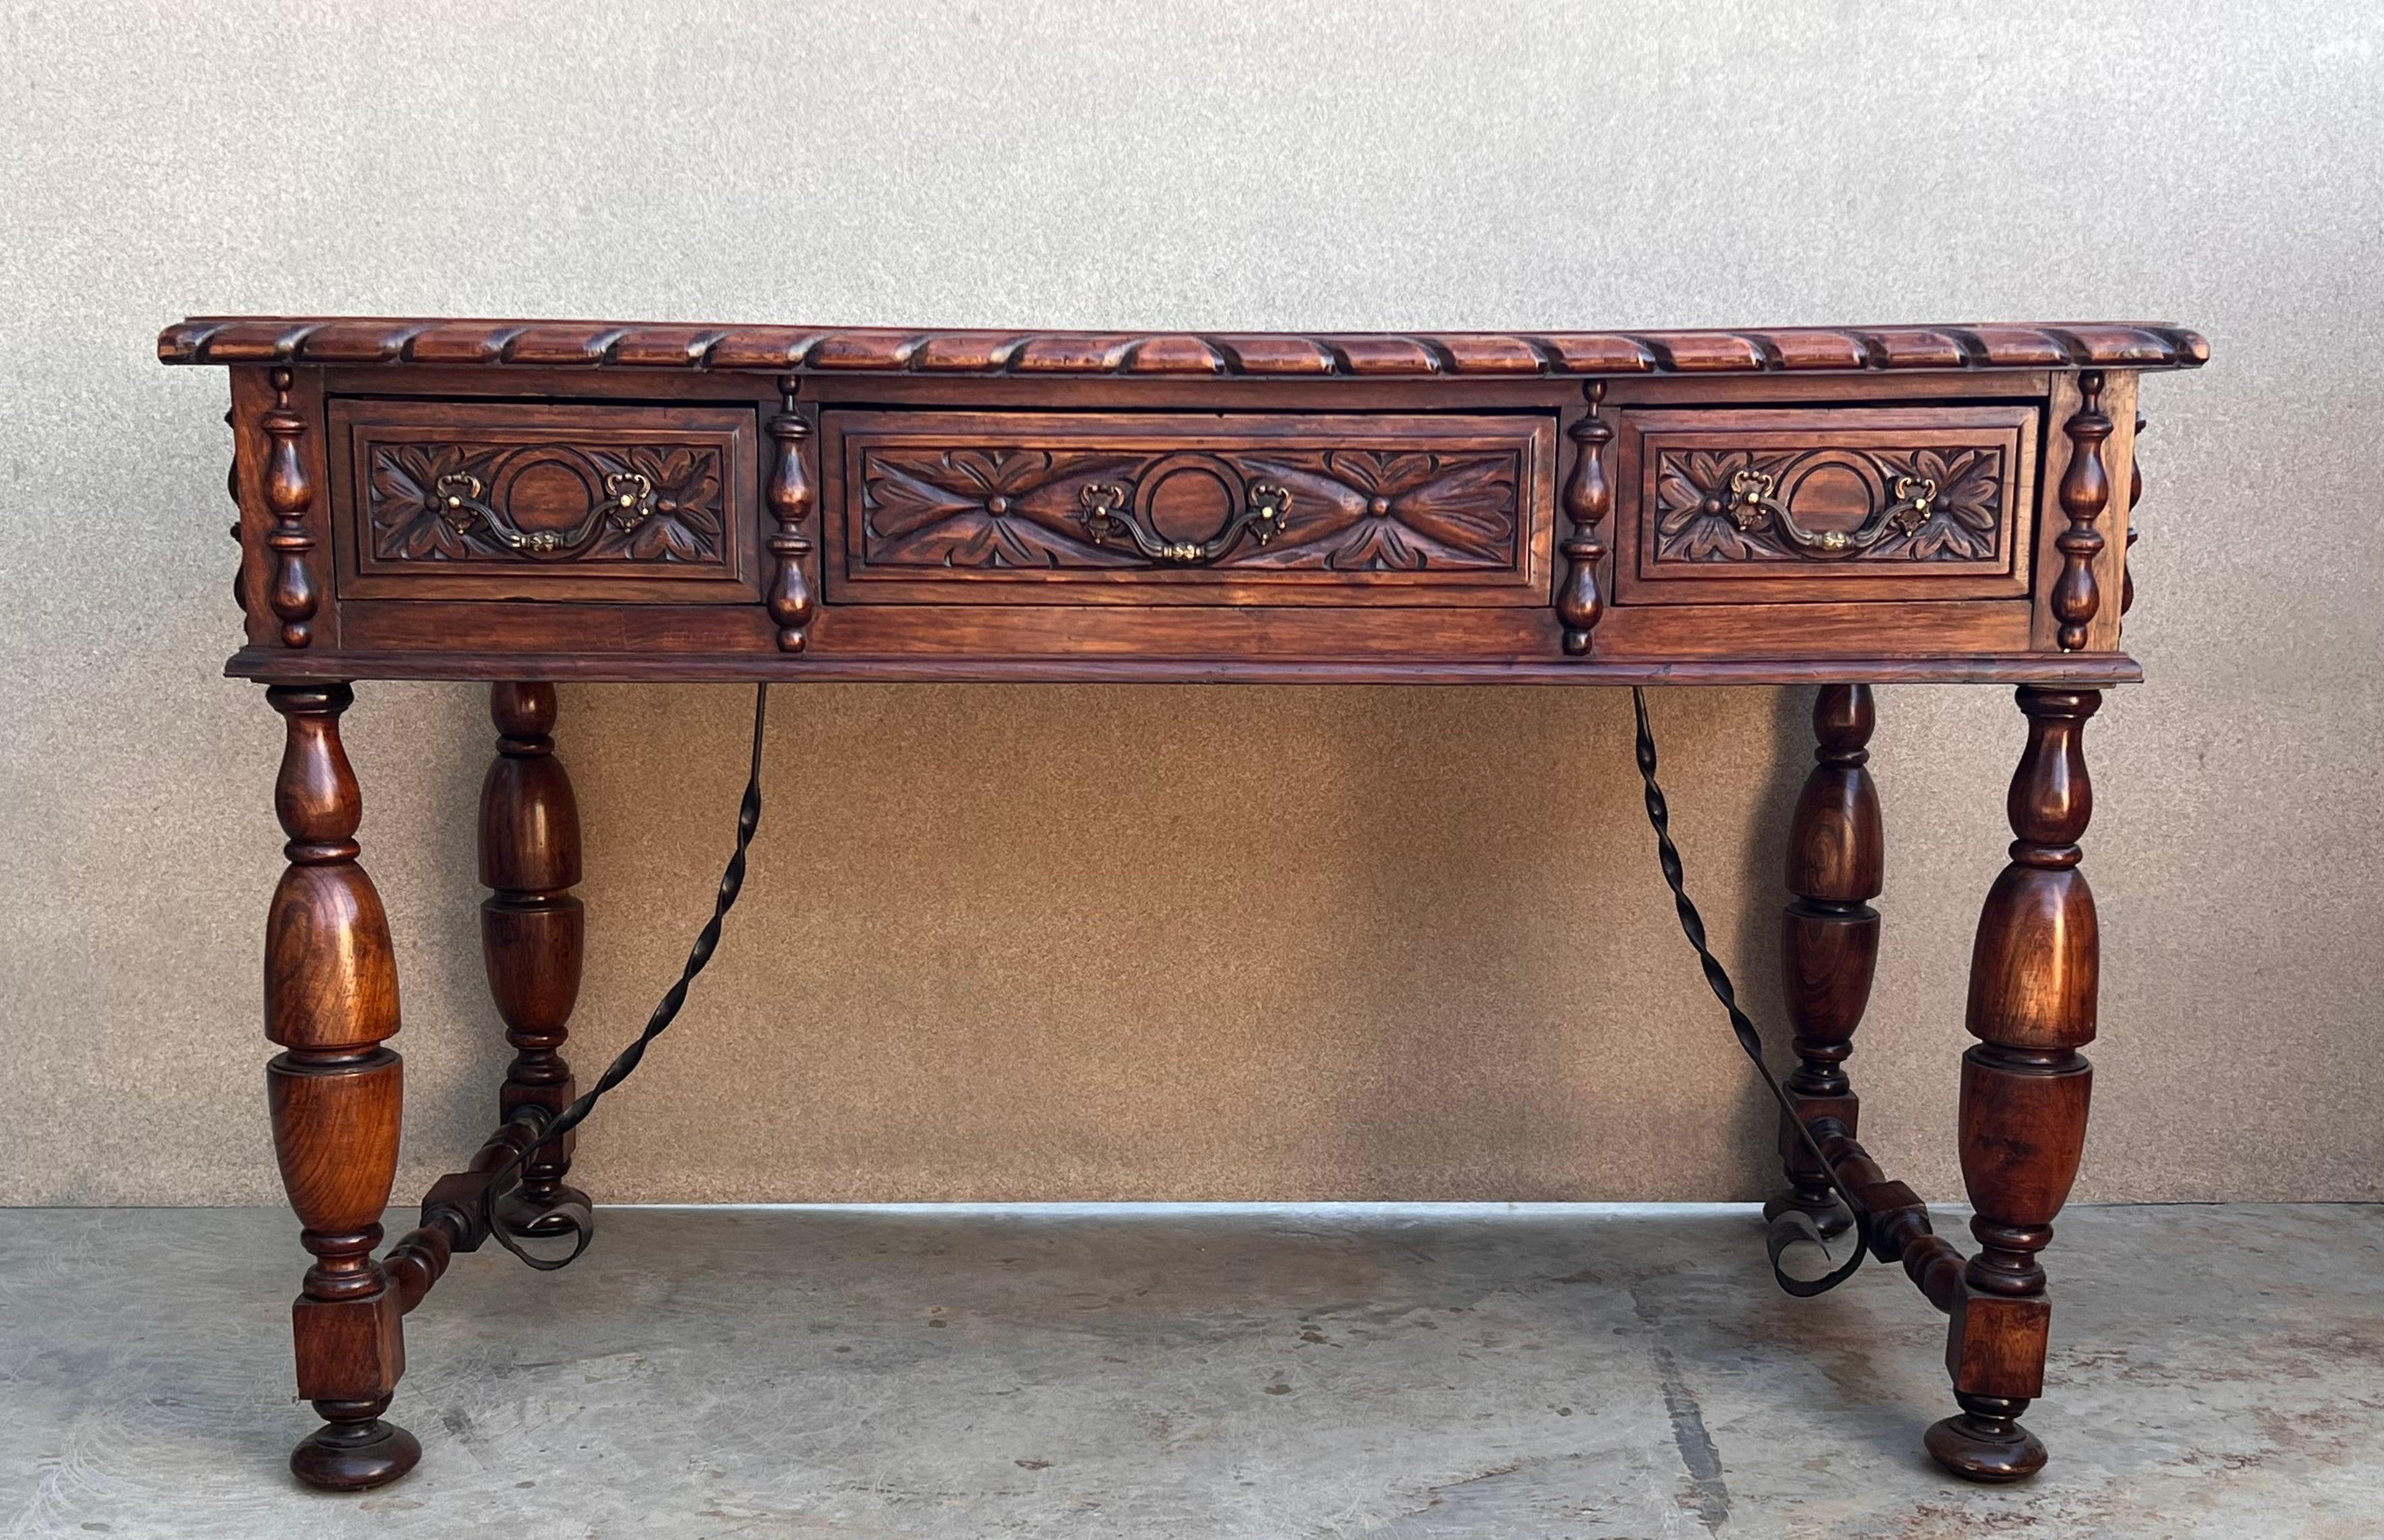 This elegant fruitwood desk was created in France, circa 1920. Made of blond walnut timber, the large writing table sits on four carved legs with two iron stretchers. The front has a wide opening with plenty of knee space and the back is embellished